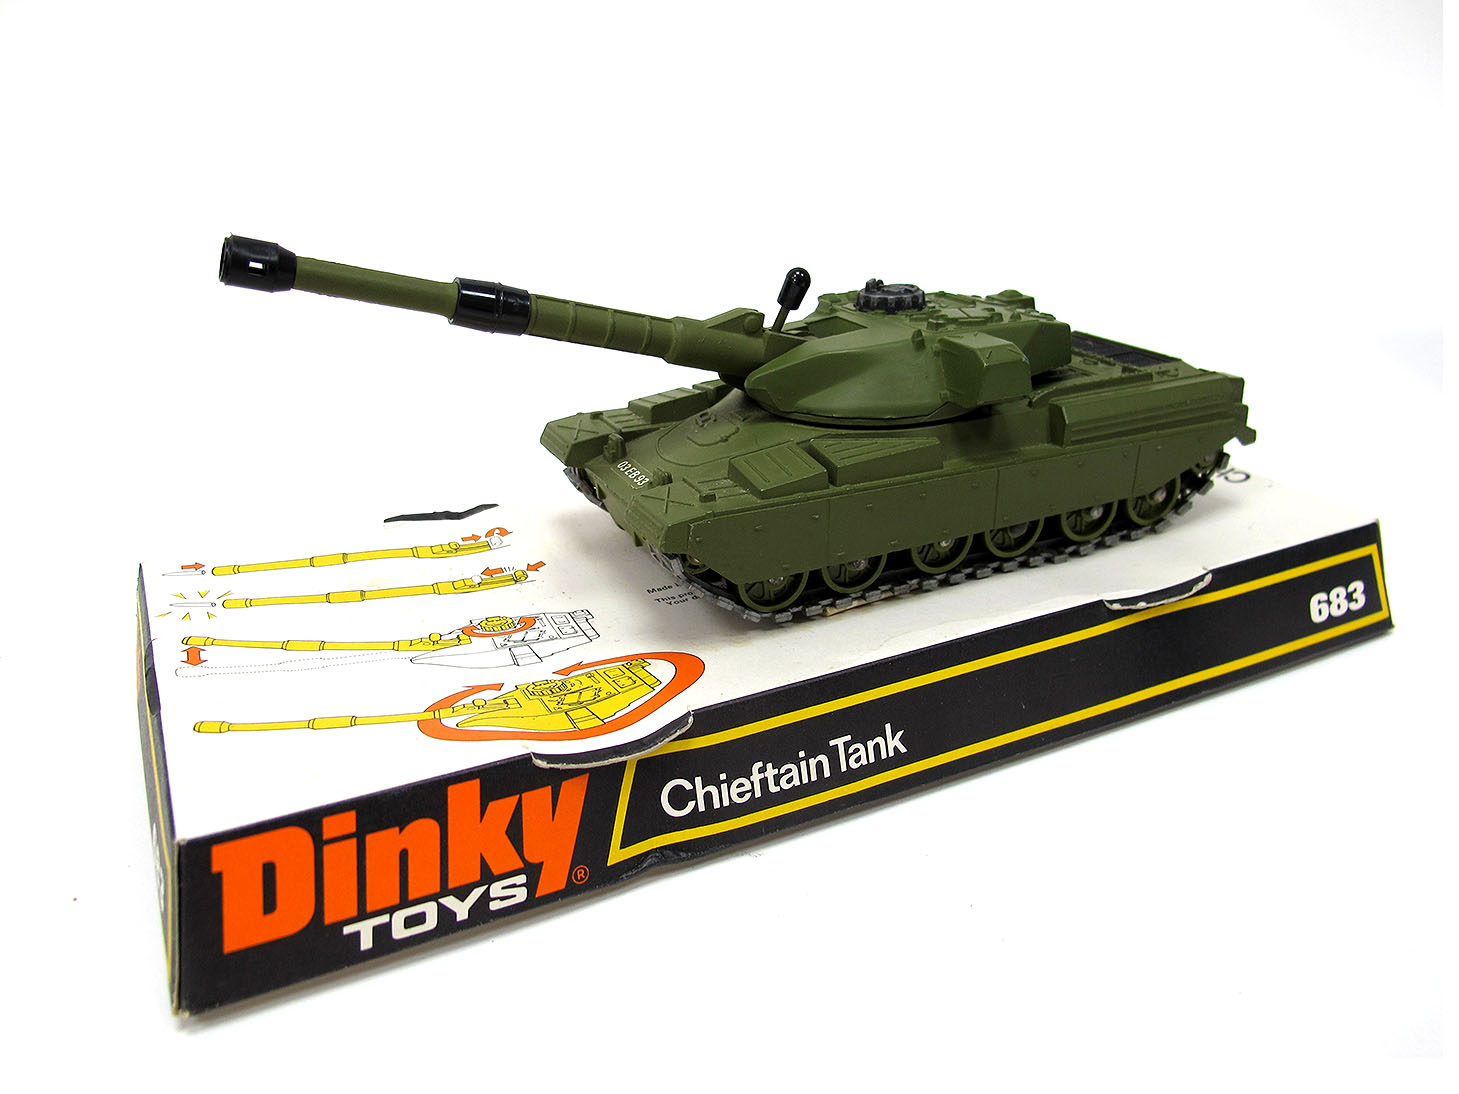 A boxed Dinky Toys 683 Chieftain Tank, very good condition, ammunition present. Box and plastic in